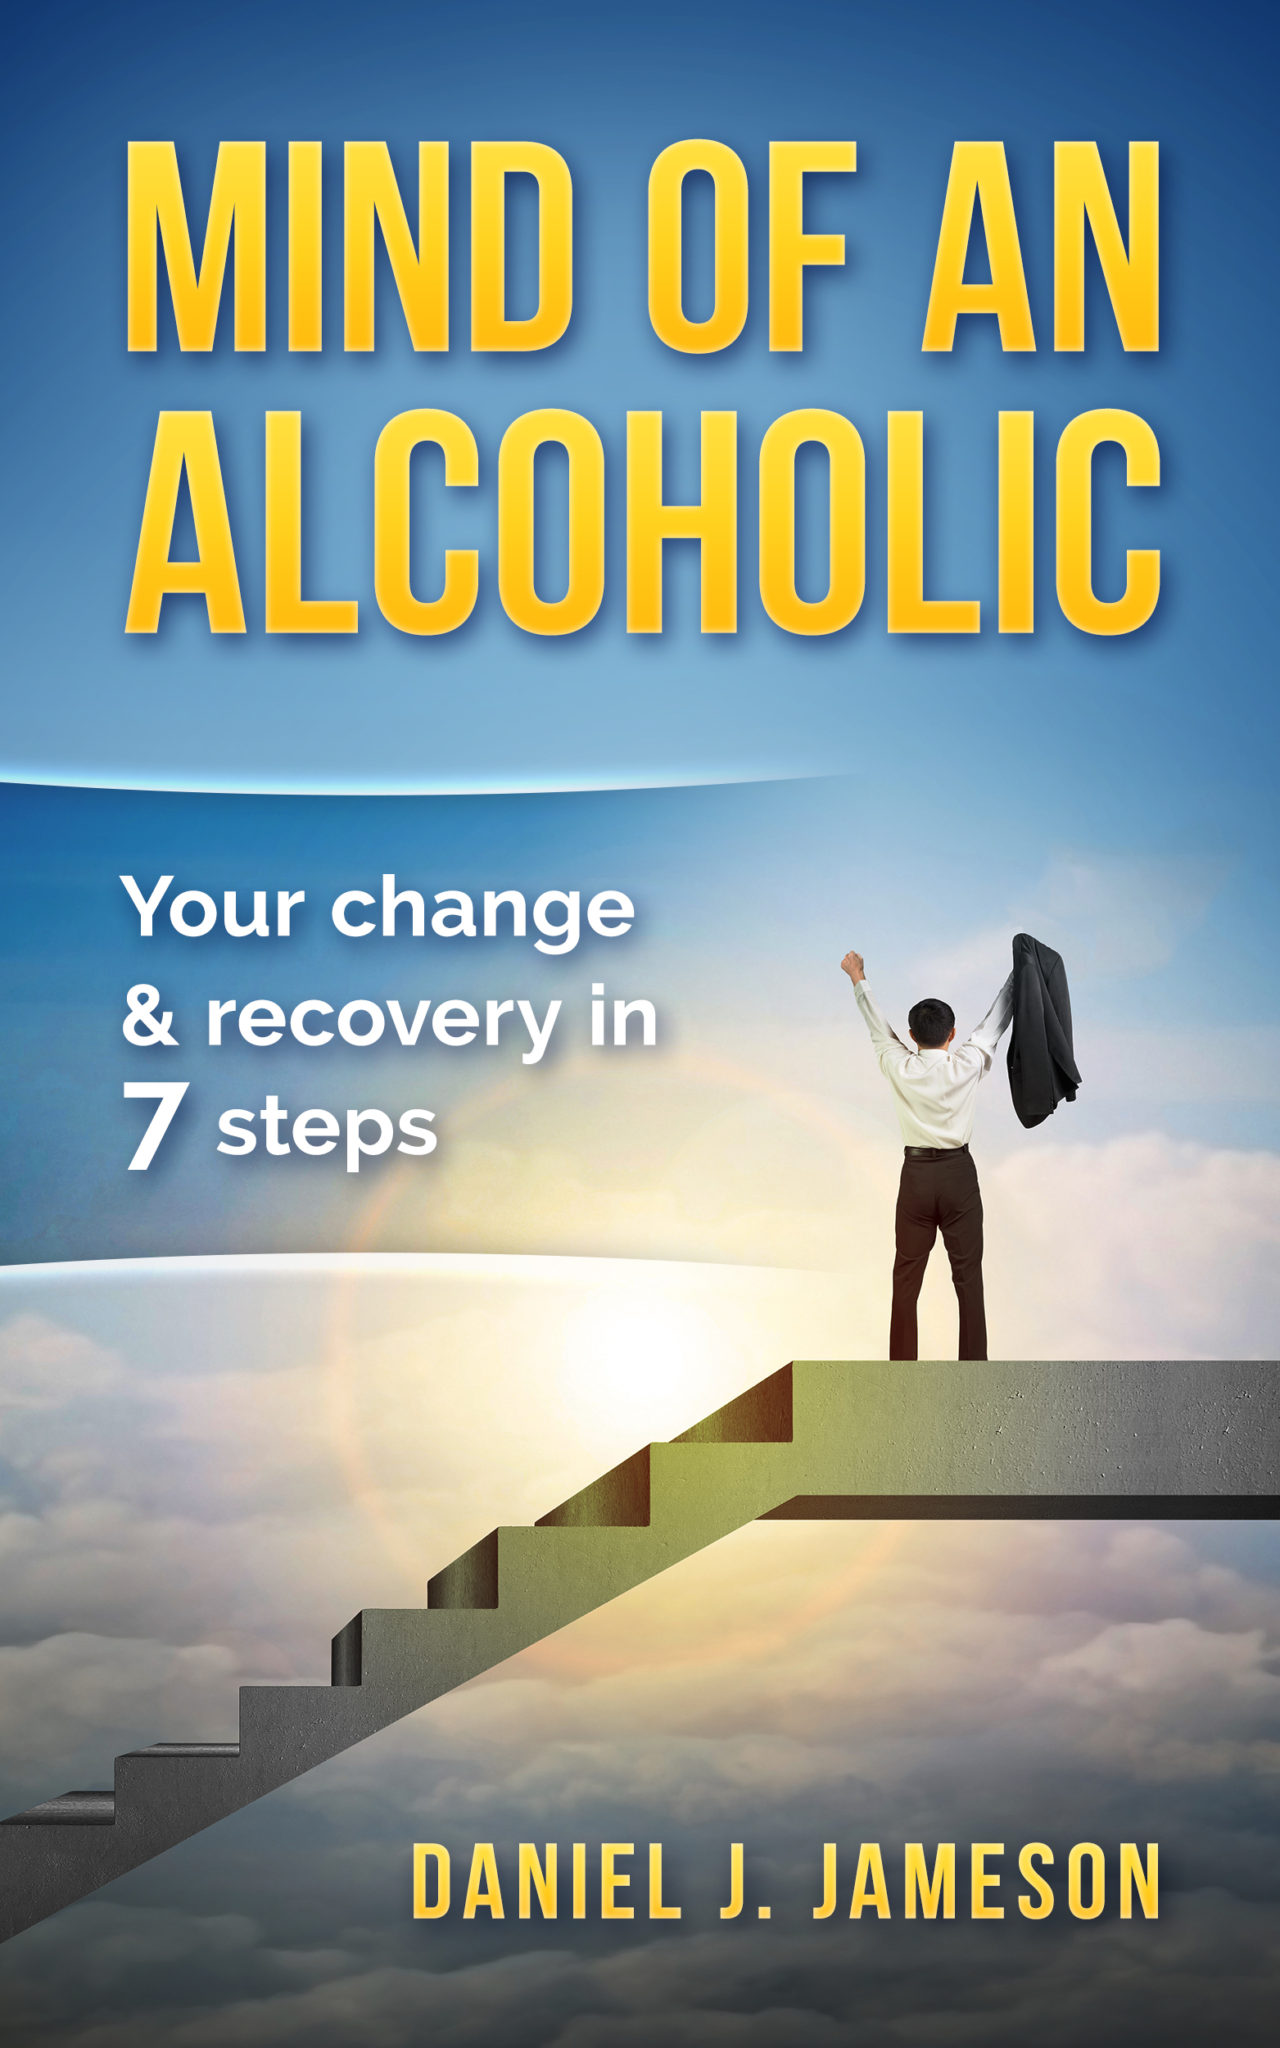 FREE: Mind of an Alcoholic: Your change & recovery in 7 steps by Daniel J. Jameson